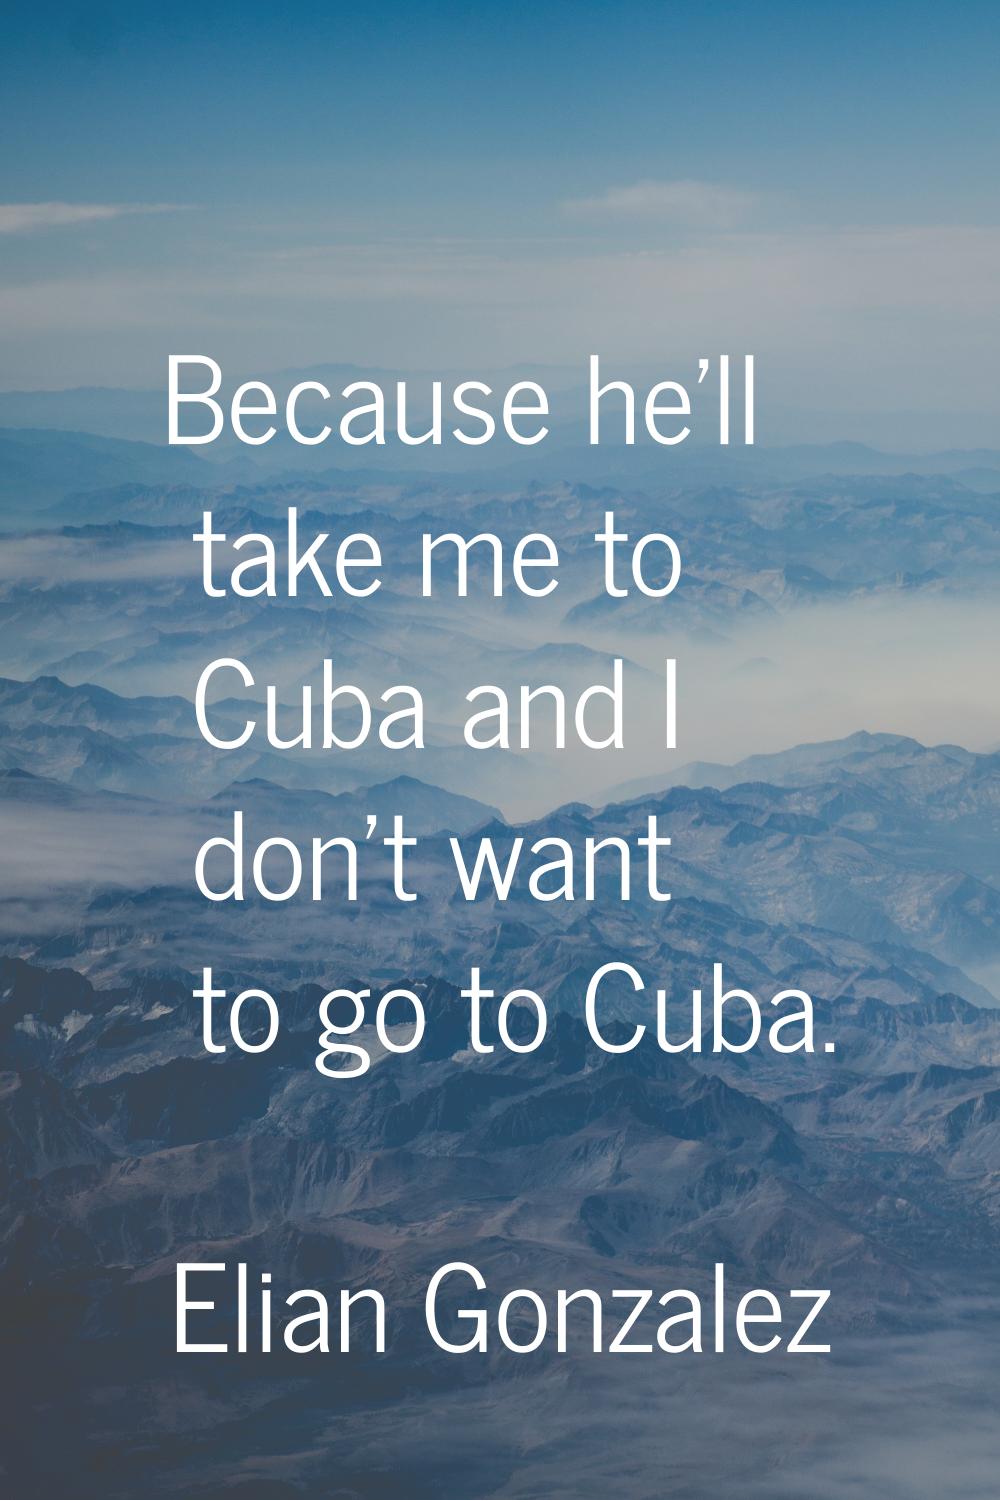 Because he'll take me to Cuba and I don't want to go to Cuba.